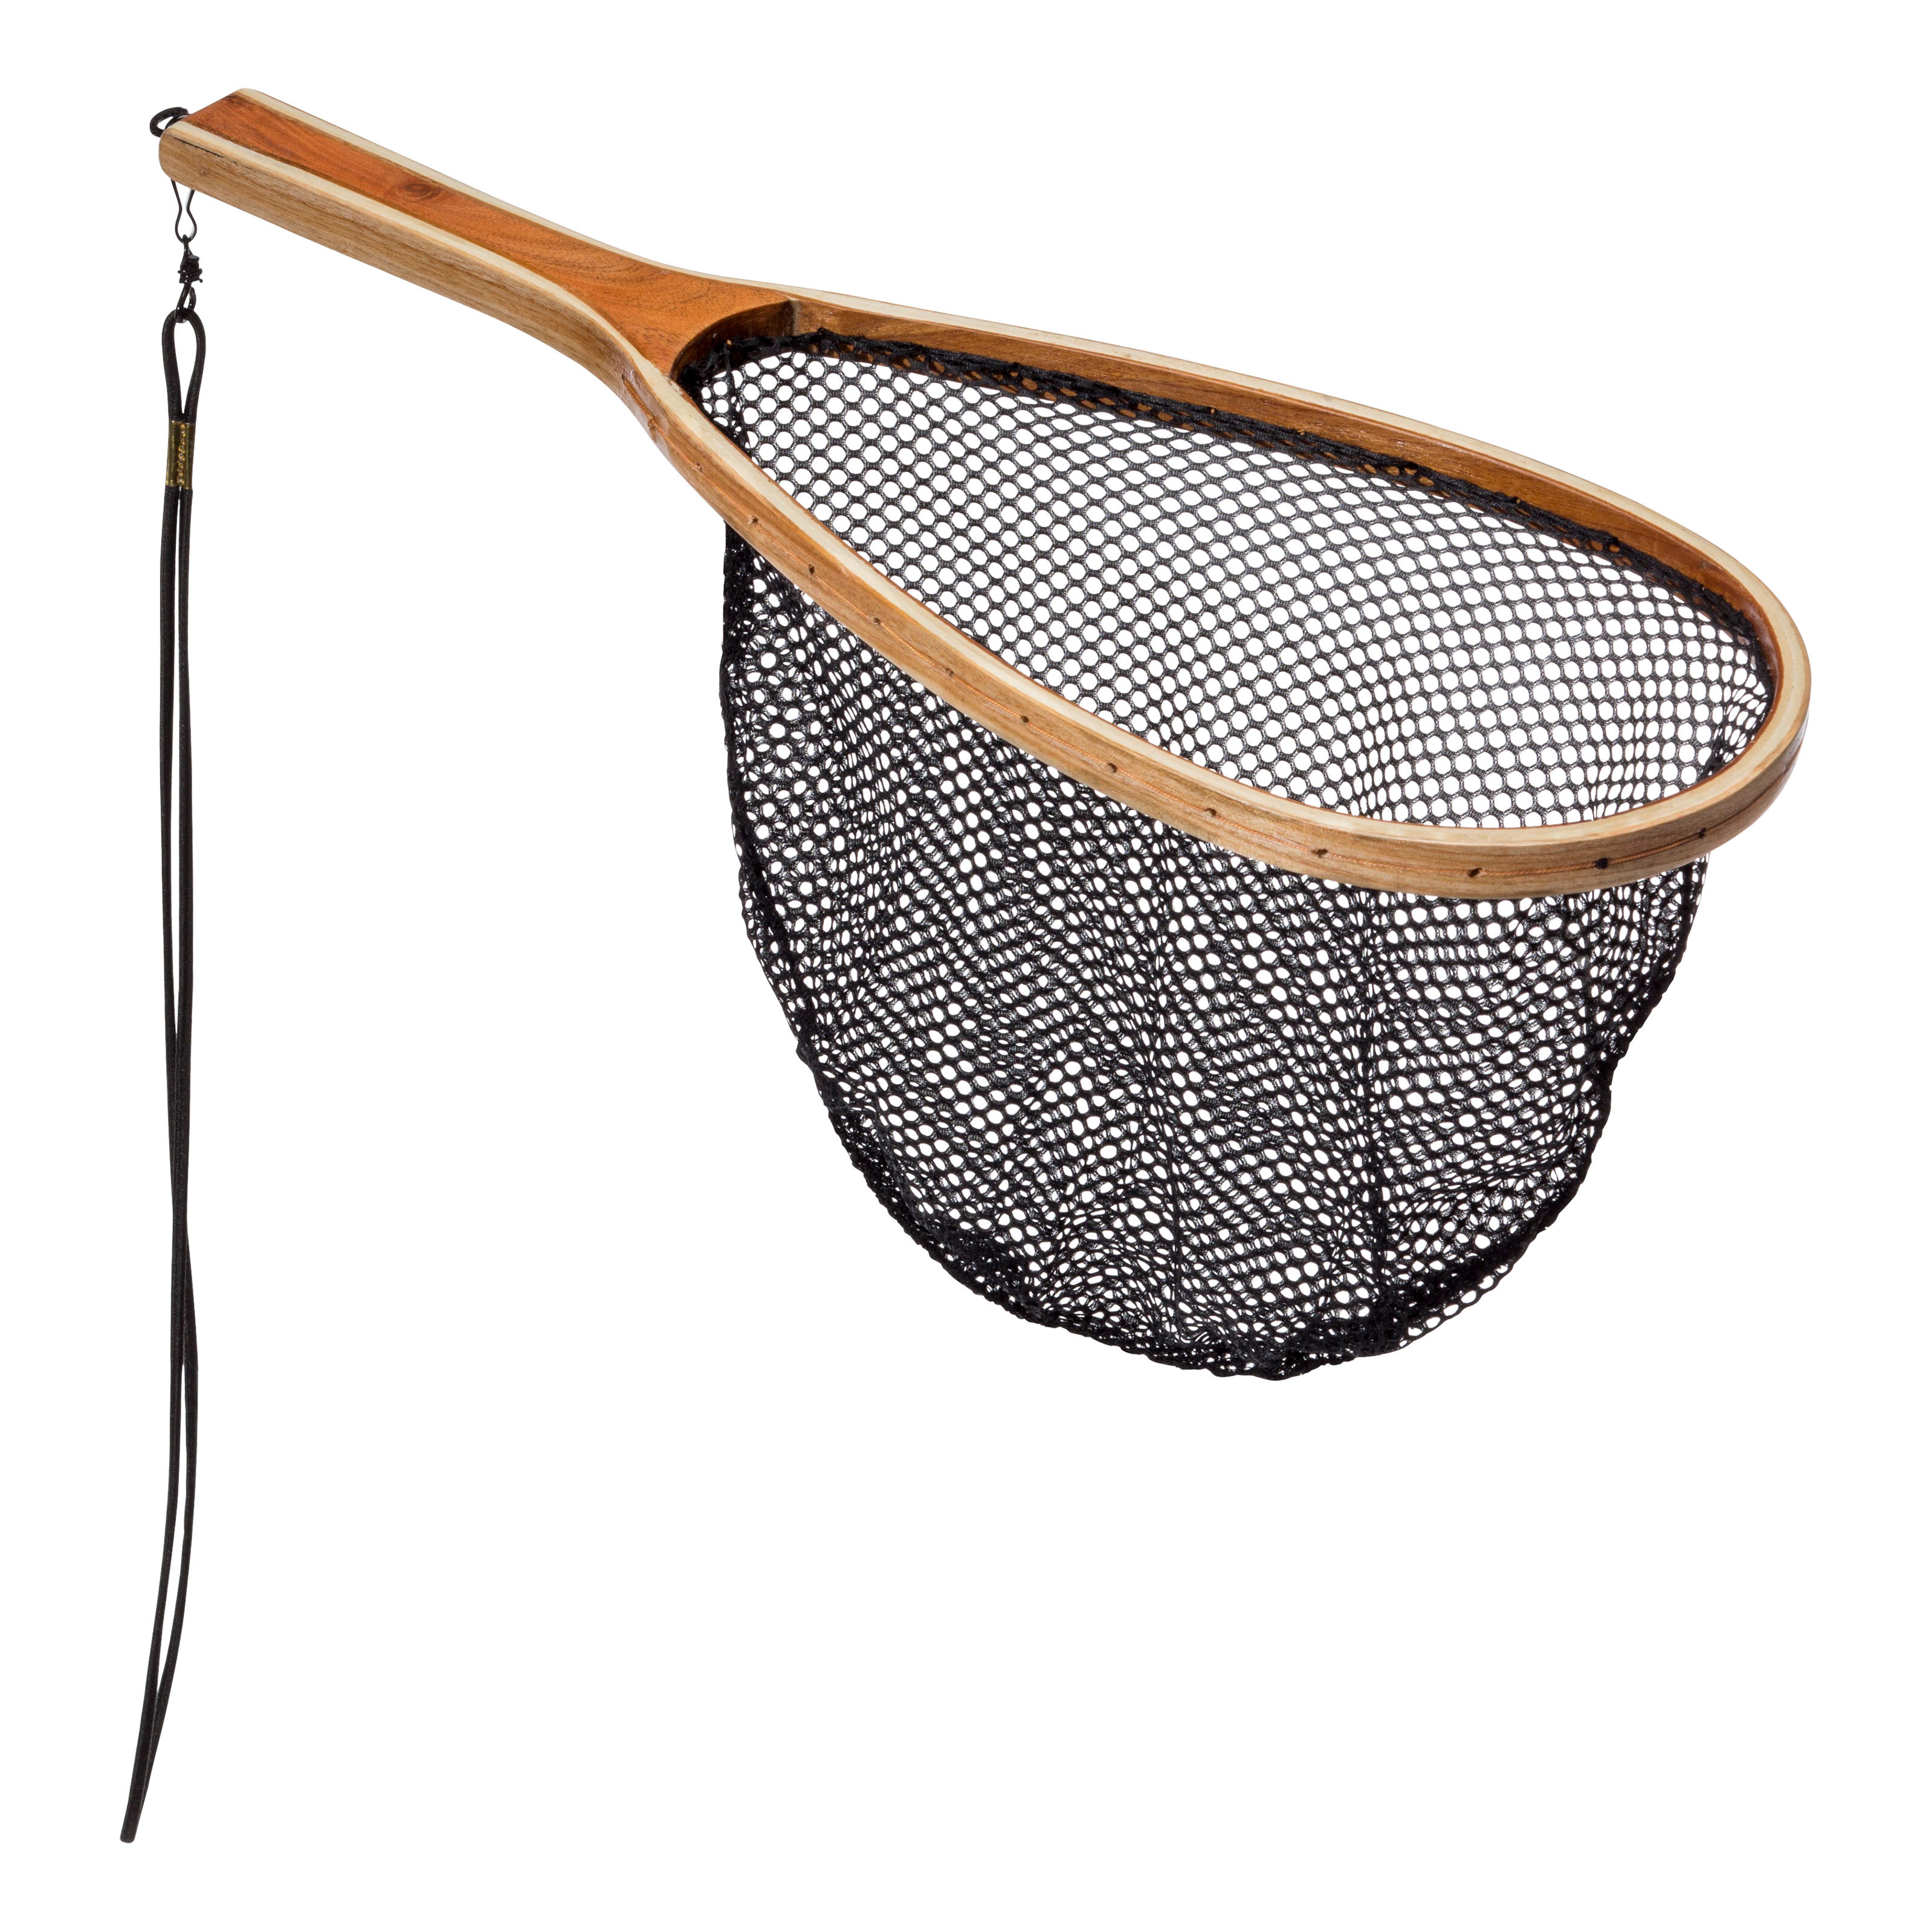 Wicker Fishing Creel White River Fly Shop Salmon Fishermans Trout